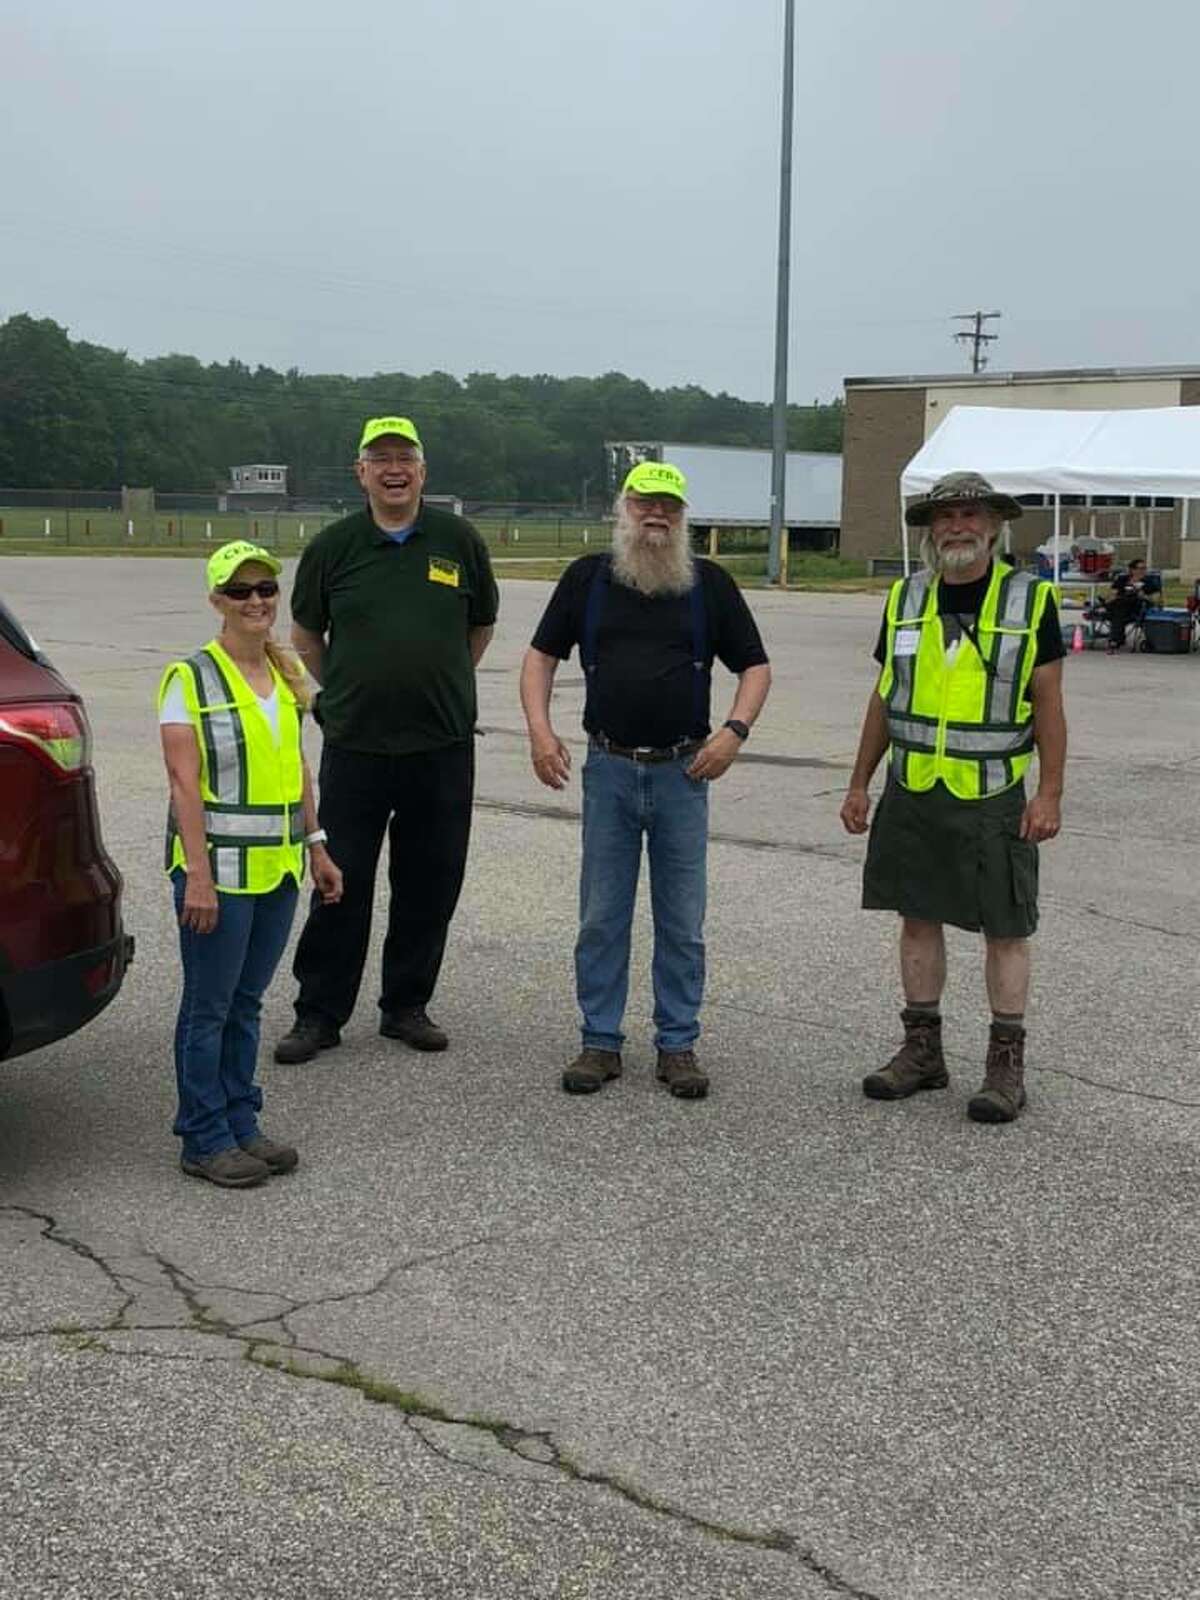 Members of the Manistee County CERT (Community Emergency Response Team) helped out at the drive-thru COVID-19 testing sites last summer. The group assists professional first responders and law enforcement during disaster situations or other emergencies, allowing them to focus on more complex tasks. (Courtesy photo)